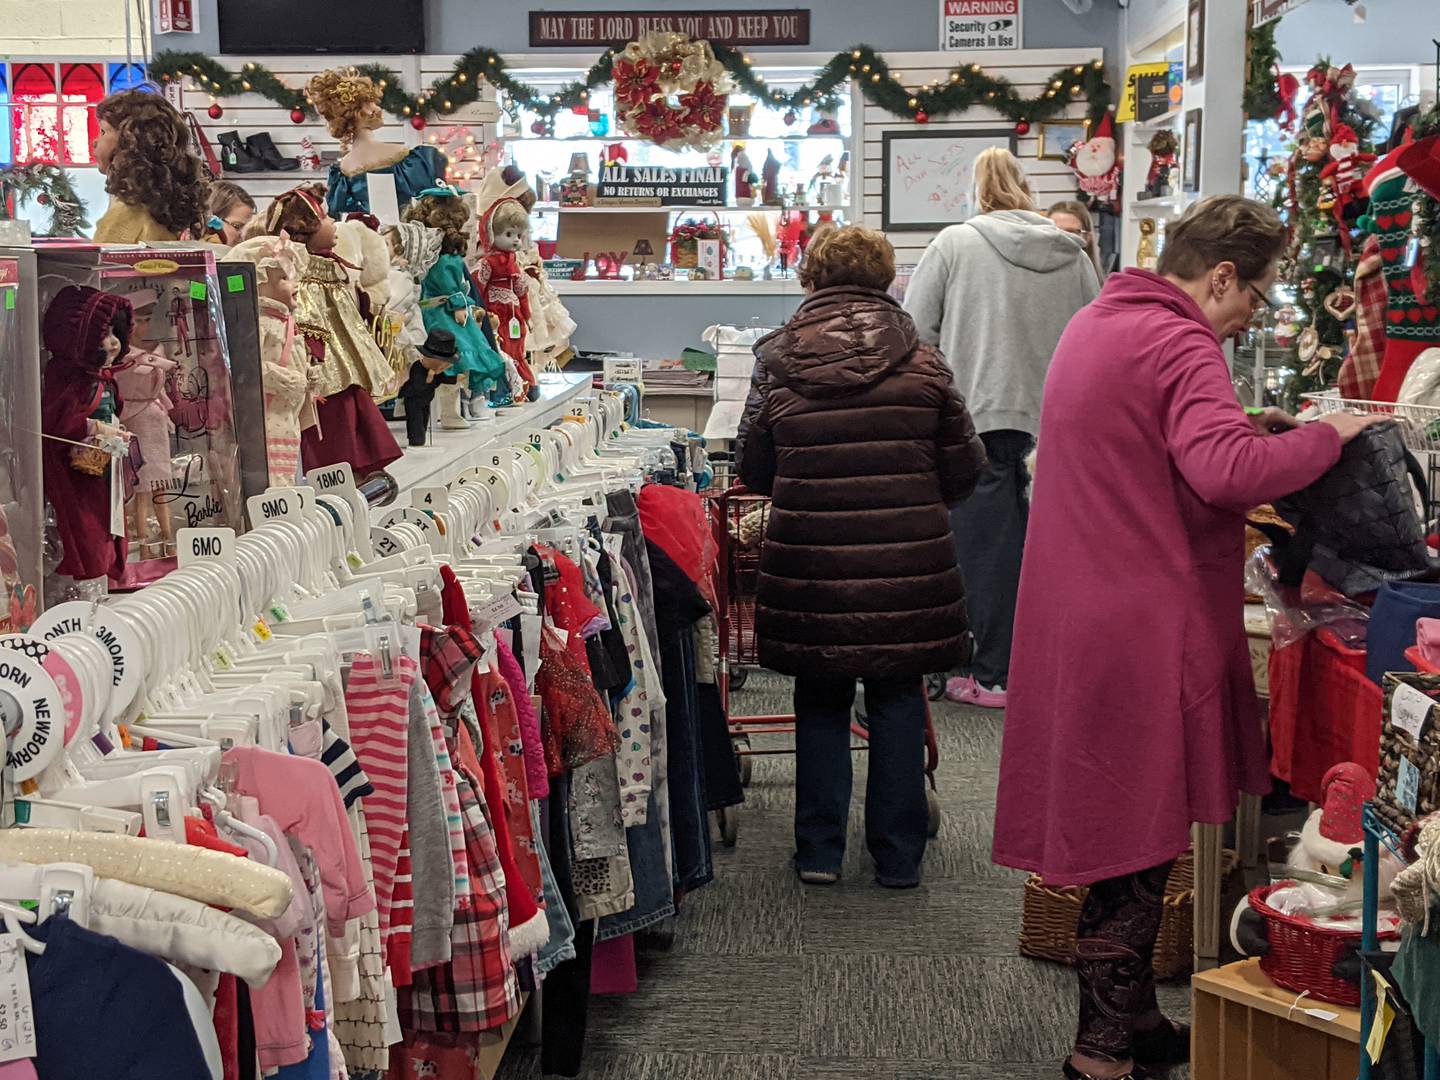 Thrift stores like Caring Hands Thrift Shop in Yorkville are seeing their fair share of holiday shoppers as people search for ways to cut costs.